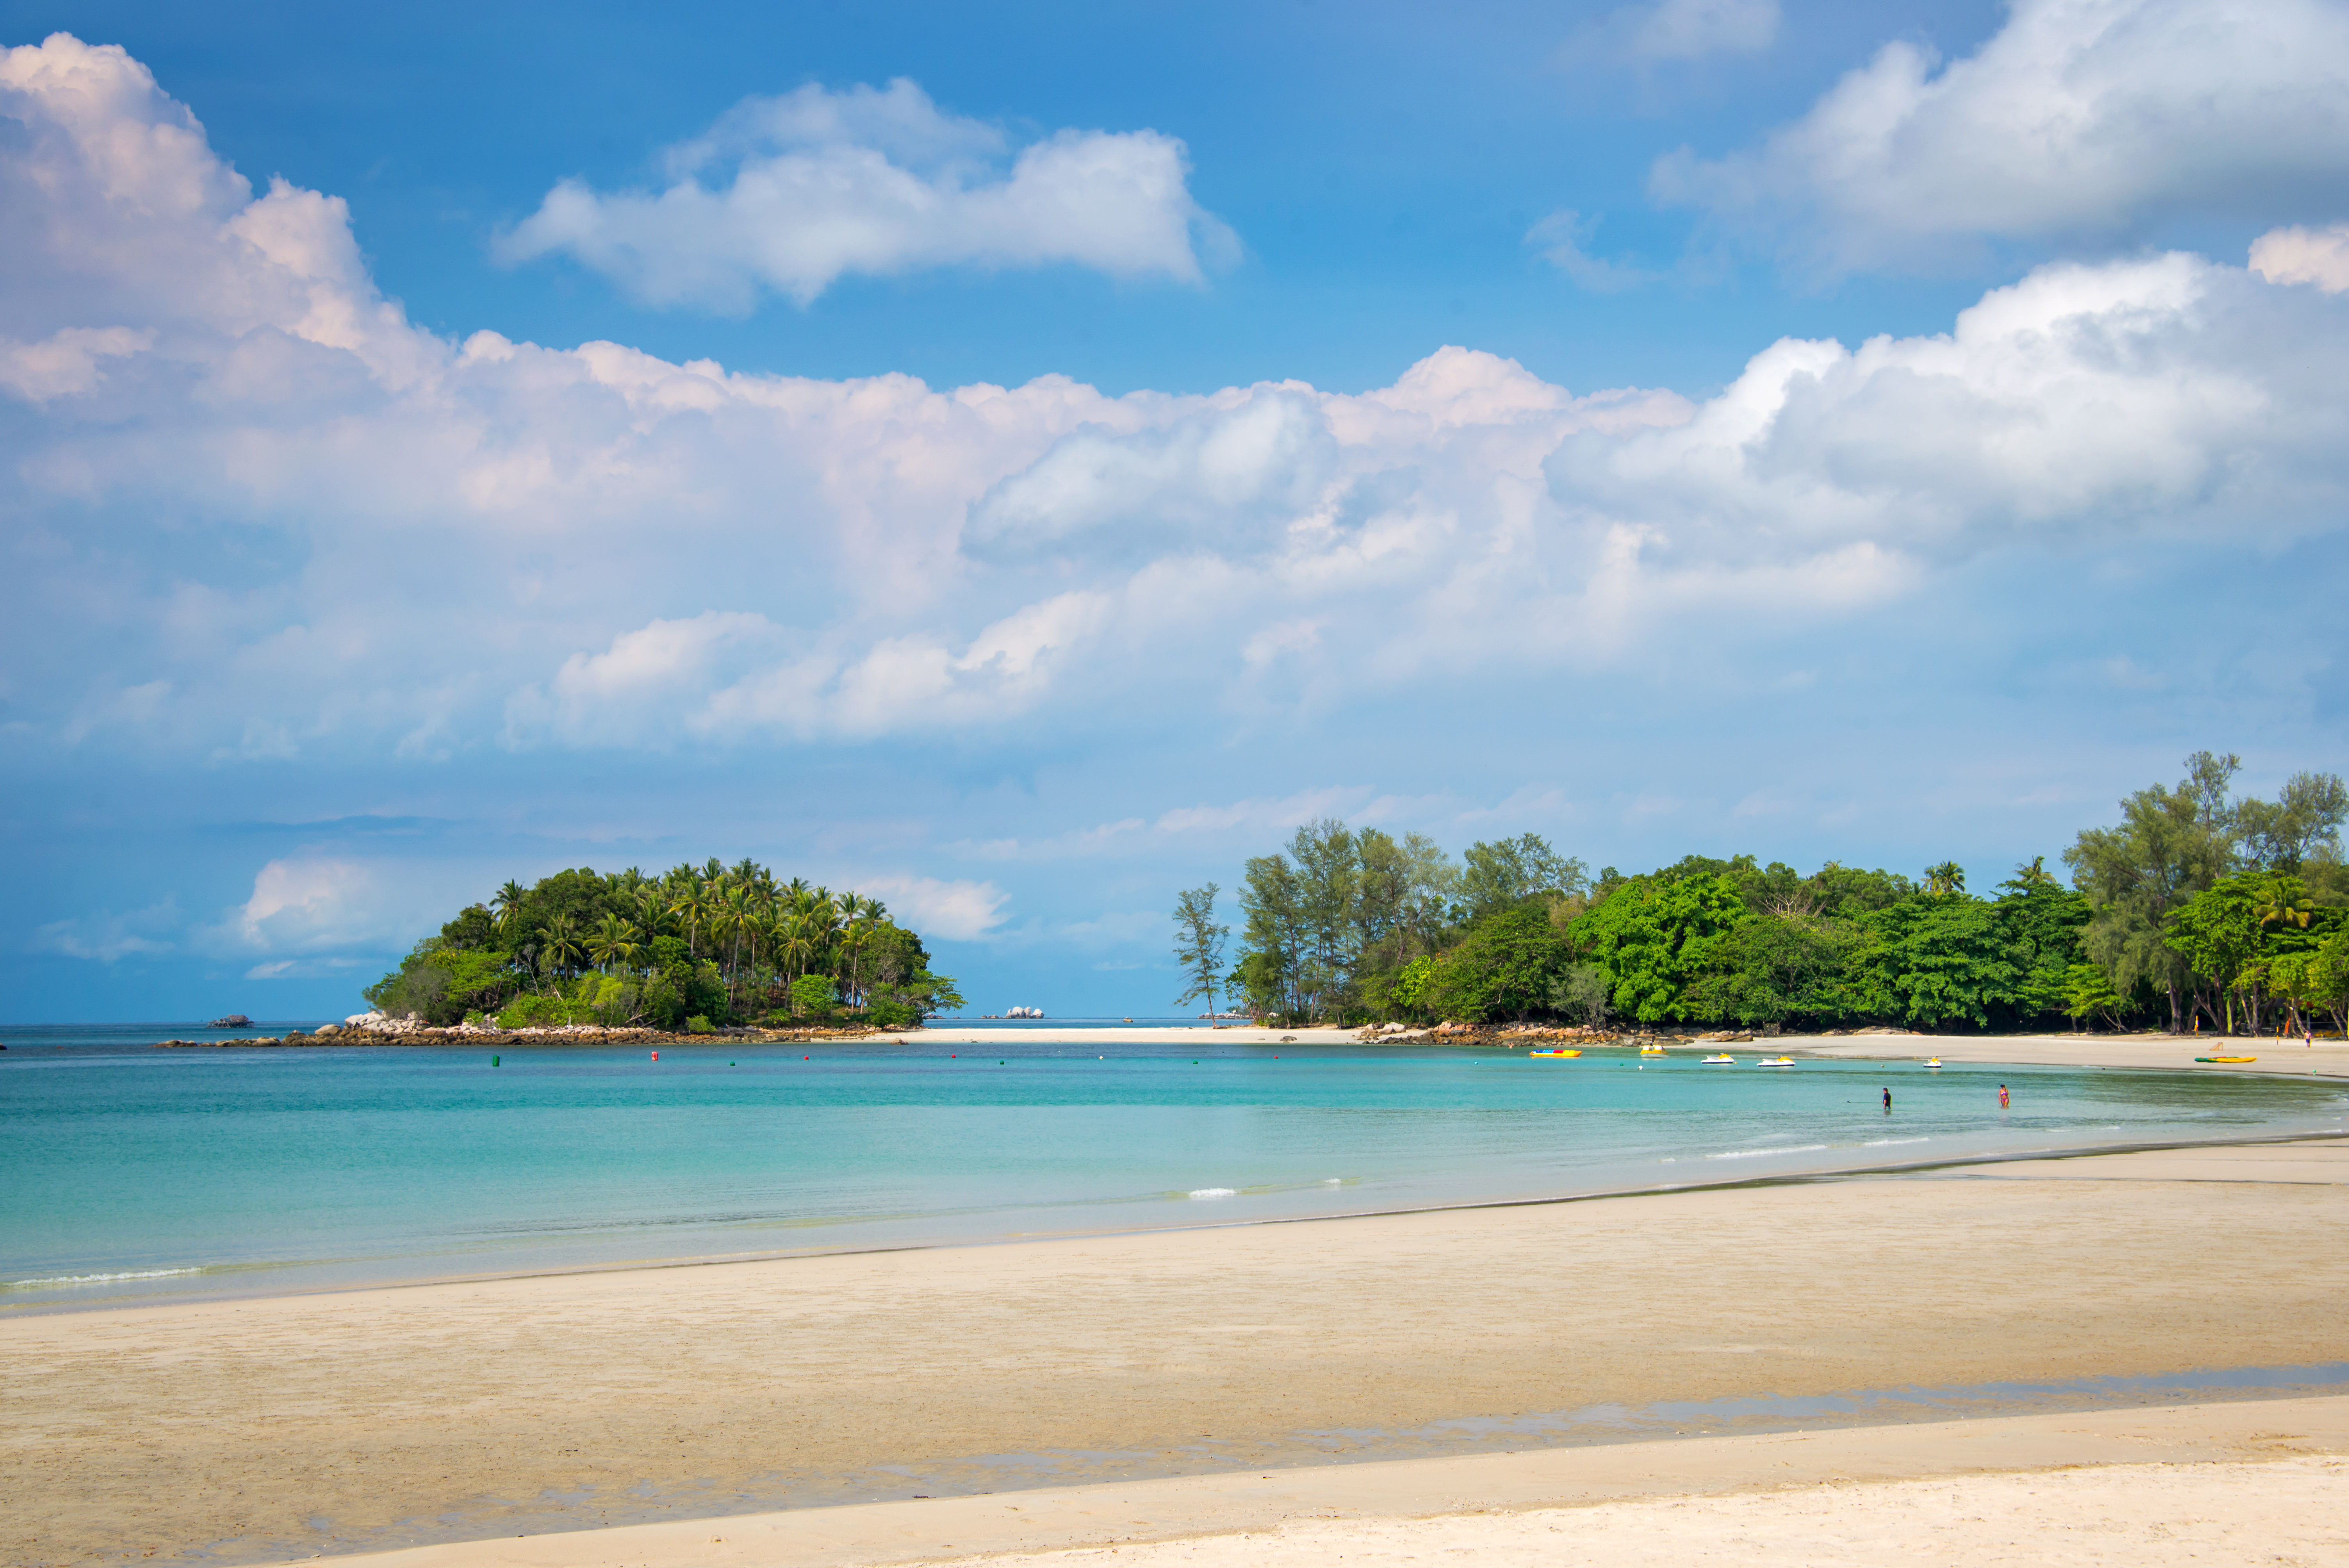 Beautiful beach view with white sand and blue water in Bintan Island.